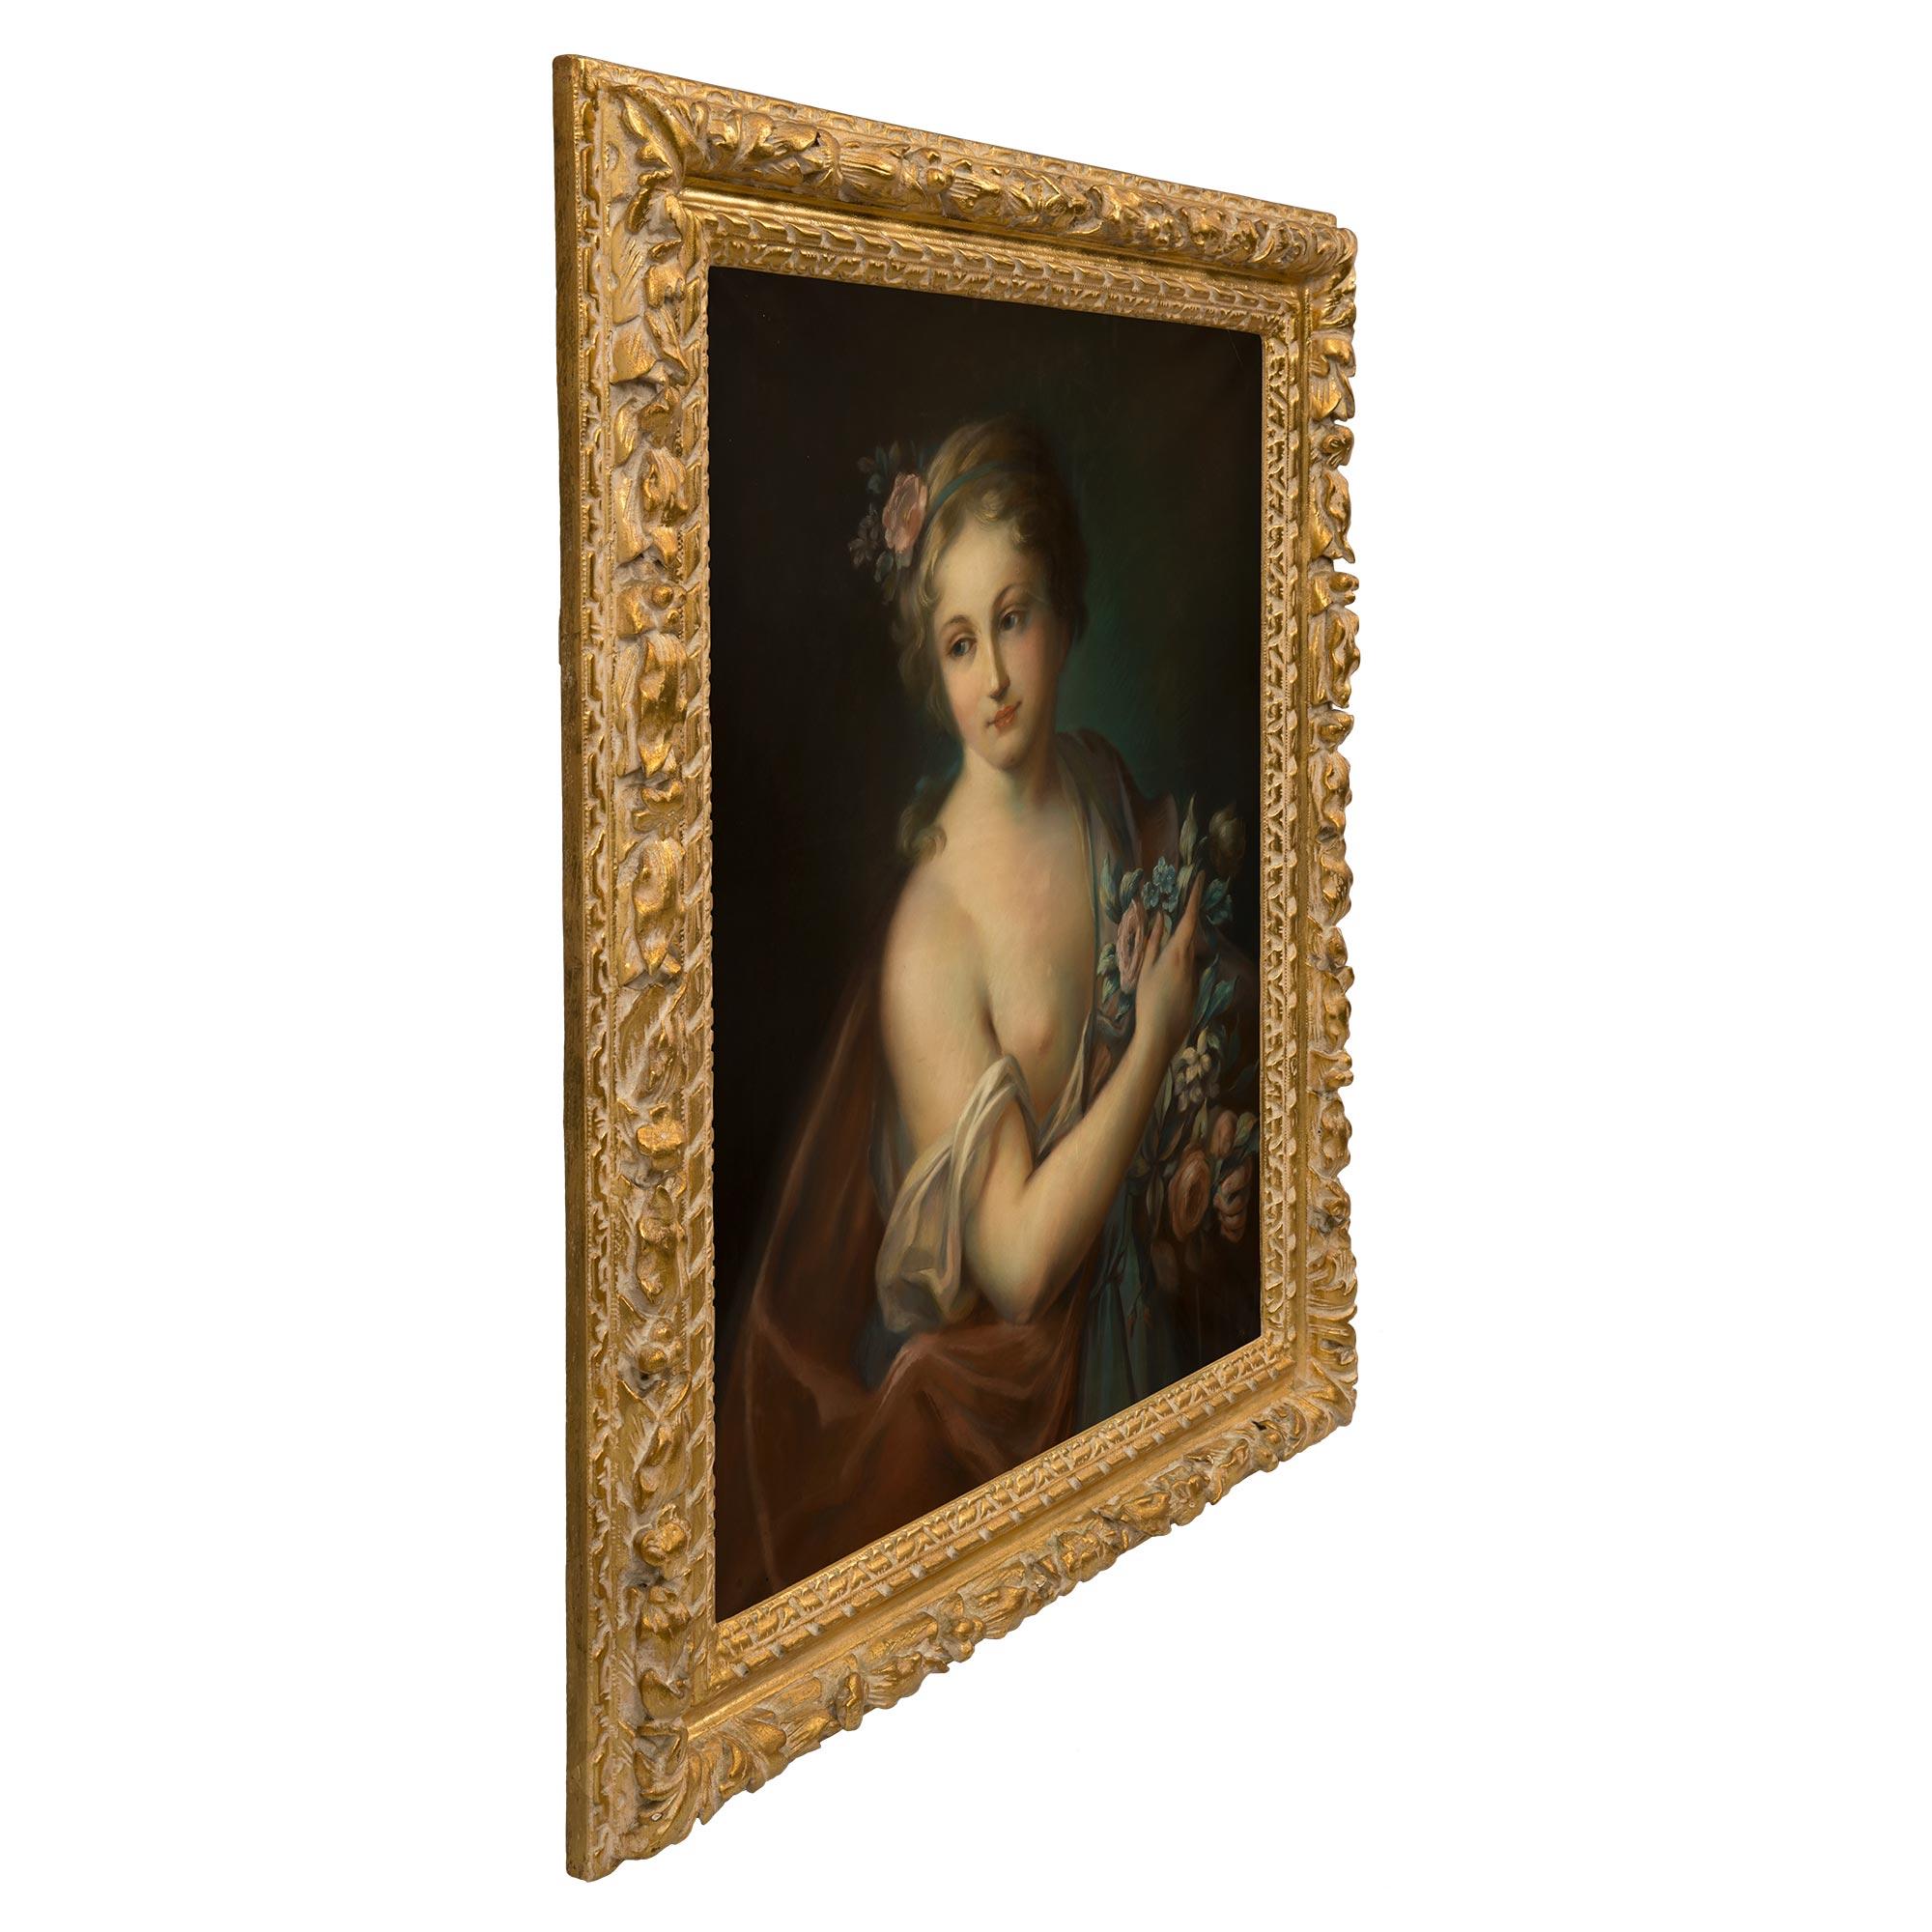 A most charming and finely detailed French 19th century Louis XVI st. pastel, in the manner of François Boucher. The pastel is framed within its original giltwood border with richly carved foliate, floral and twisted ribbon designs. The lovely